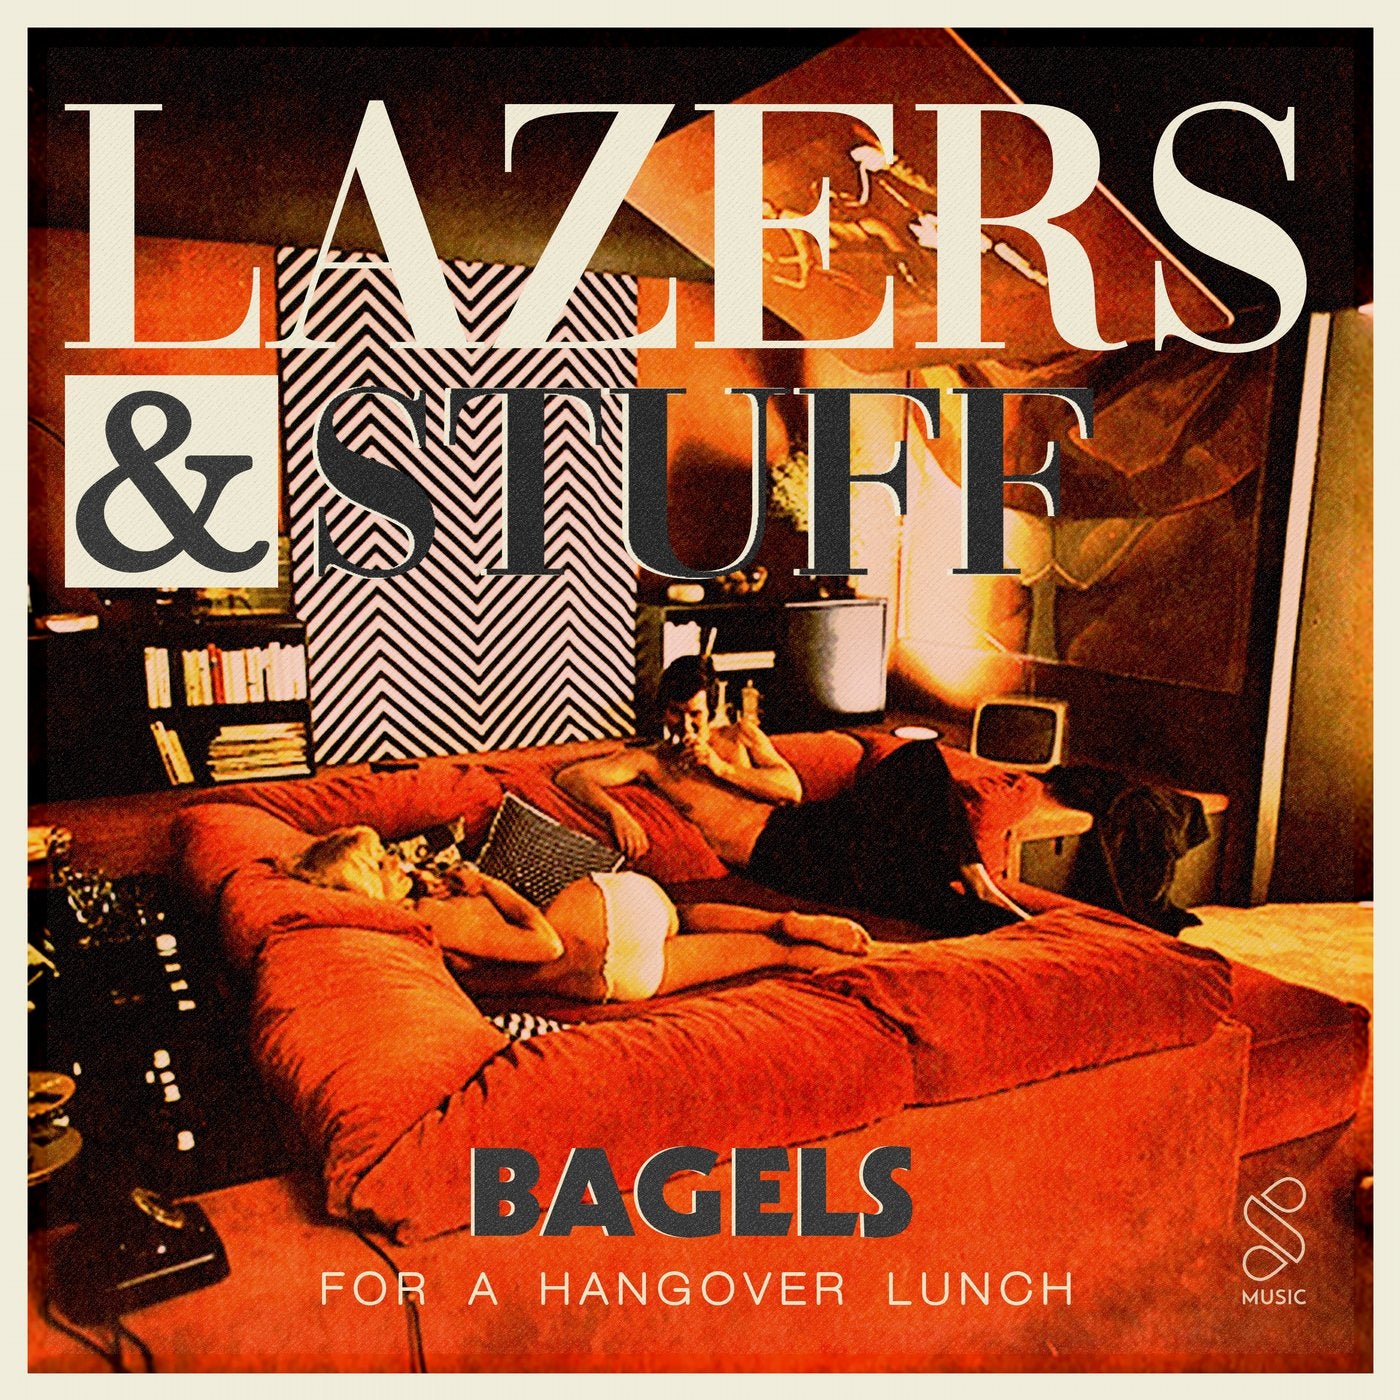 Bagels For A Hangover Lunch